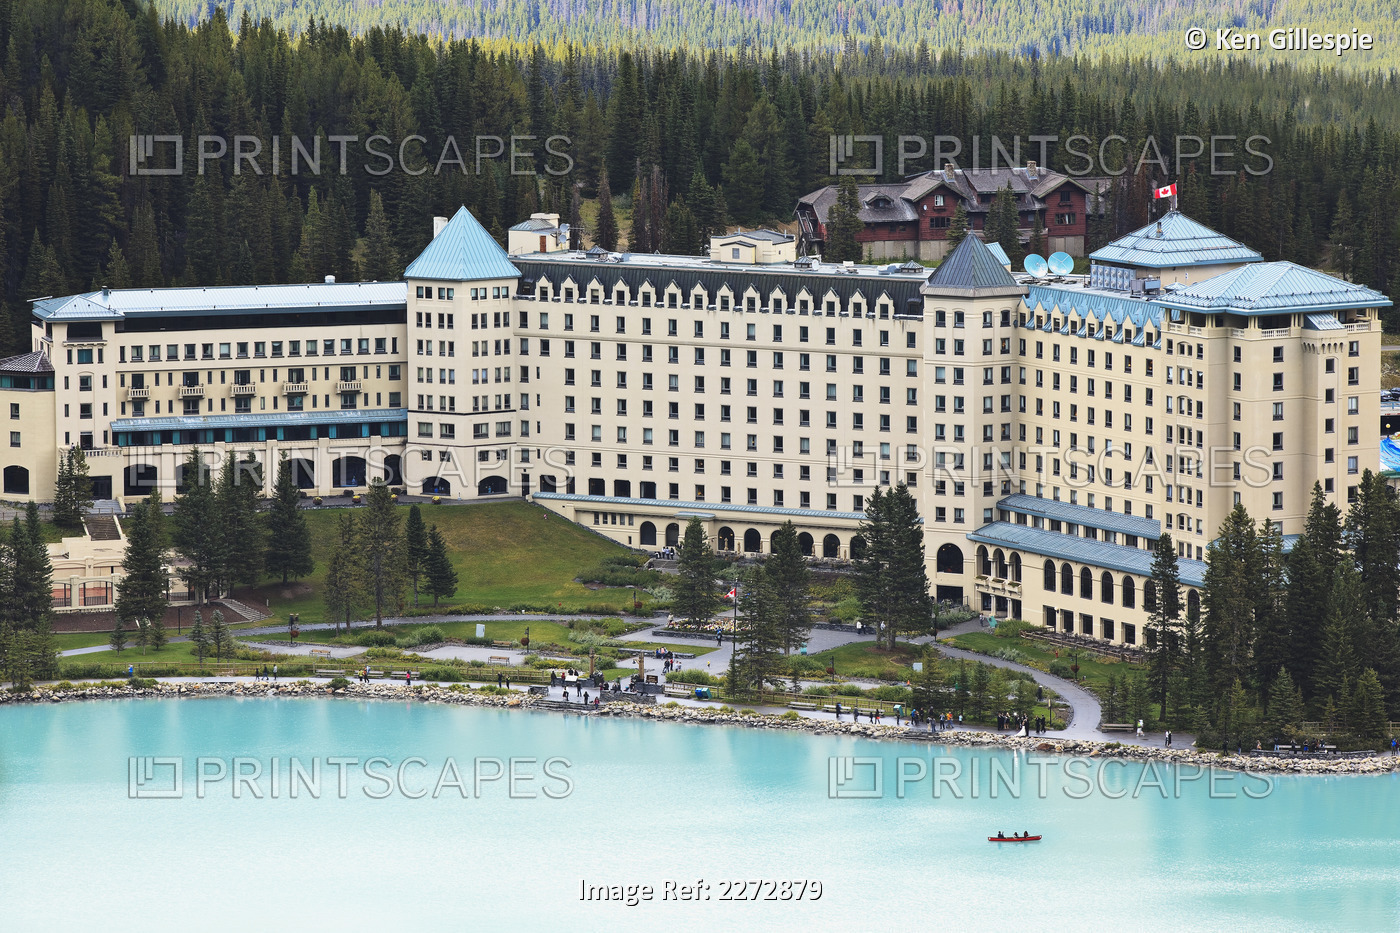 The fairmont chateau lake louise resort hotel at lake louise in banff national ...